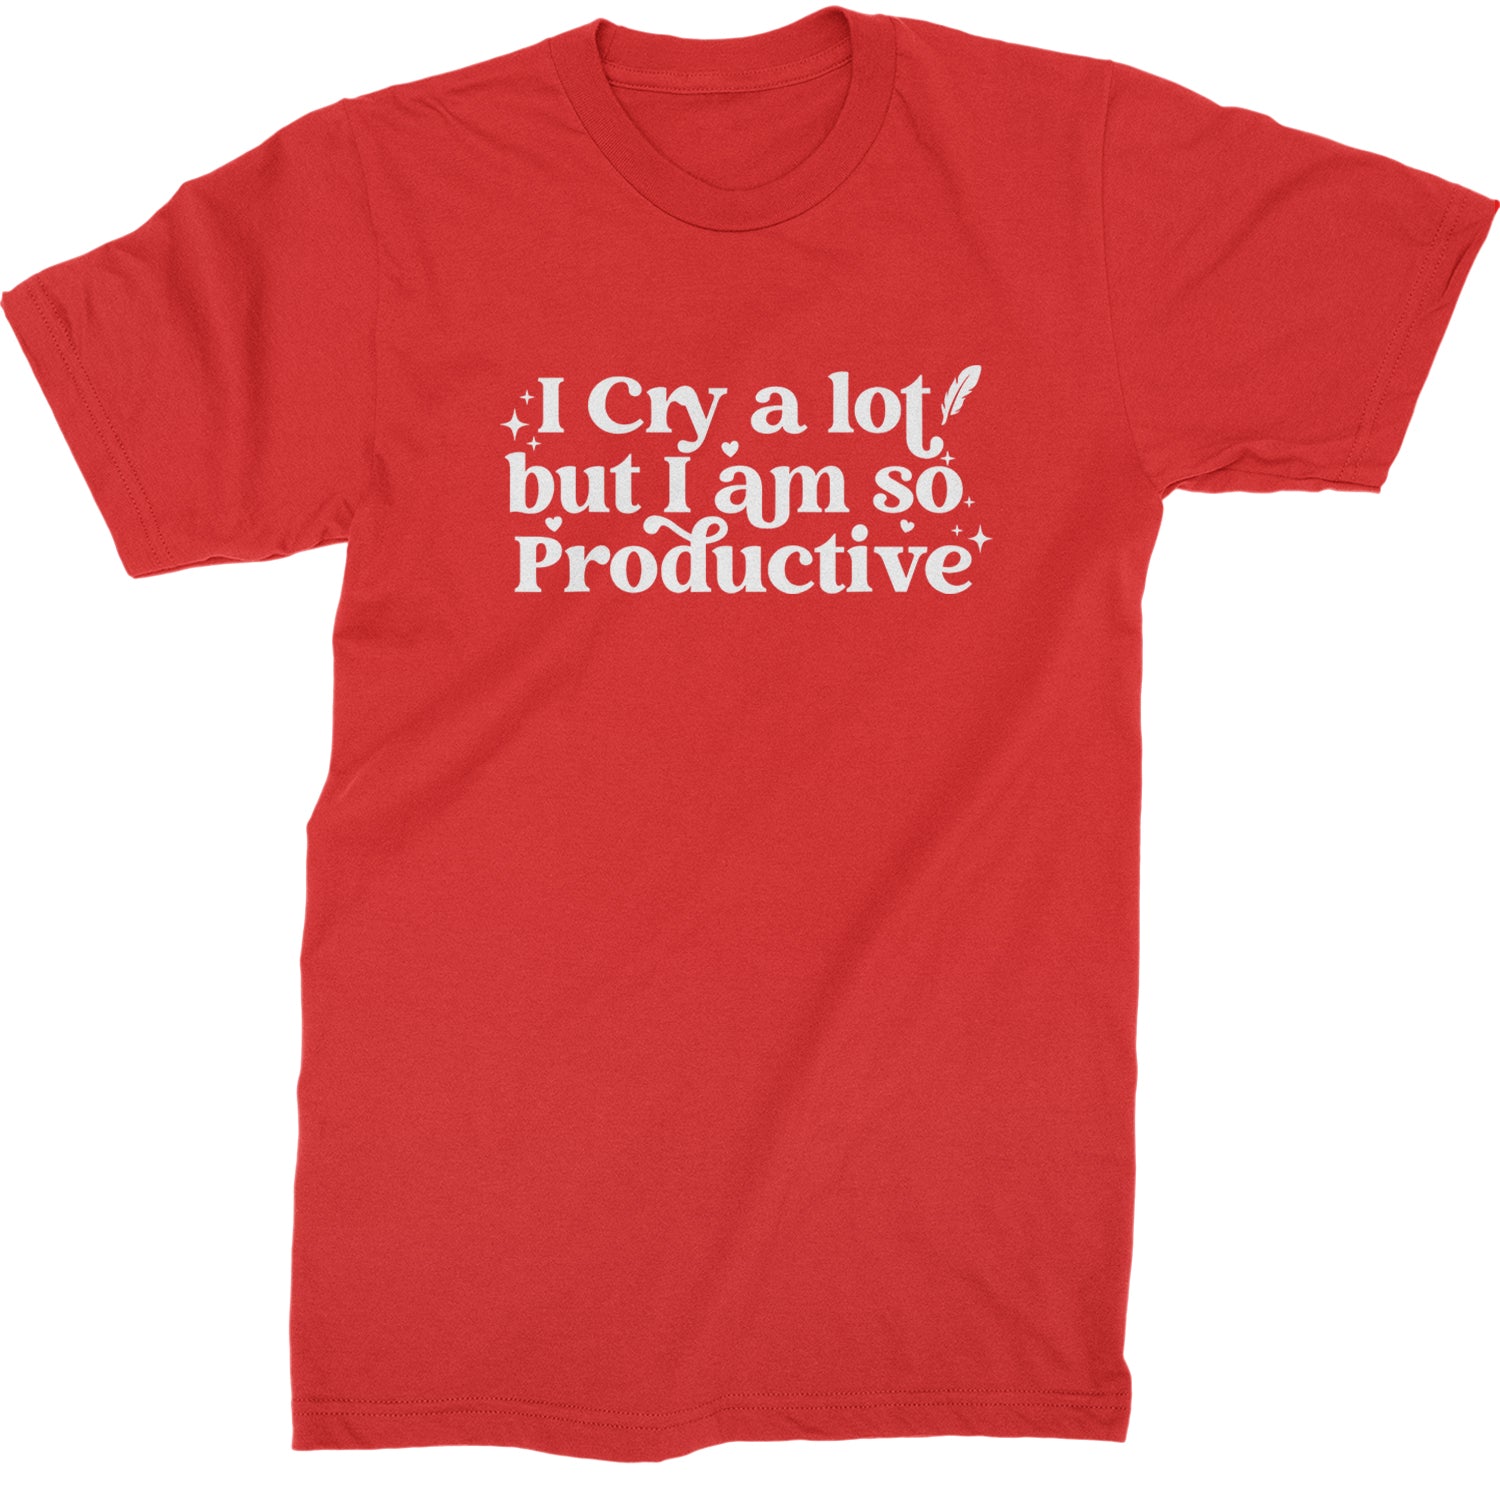 I Cry A Lot But I am So Productive TTPD Mens T-shirt Red